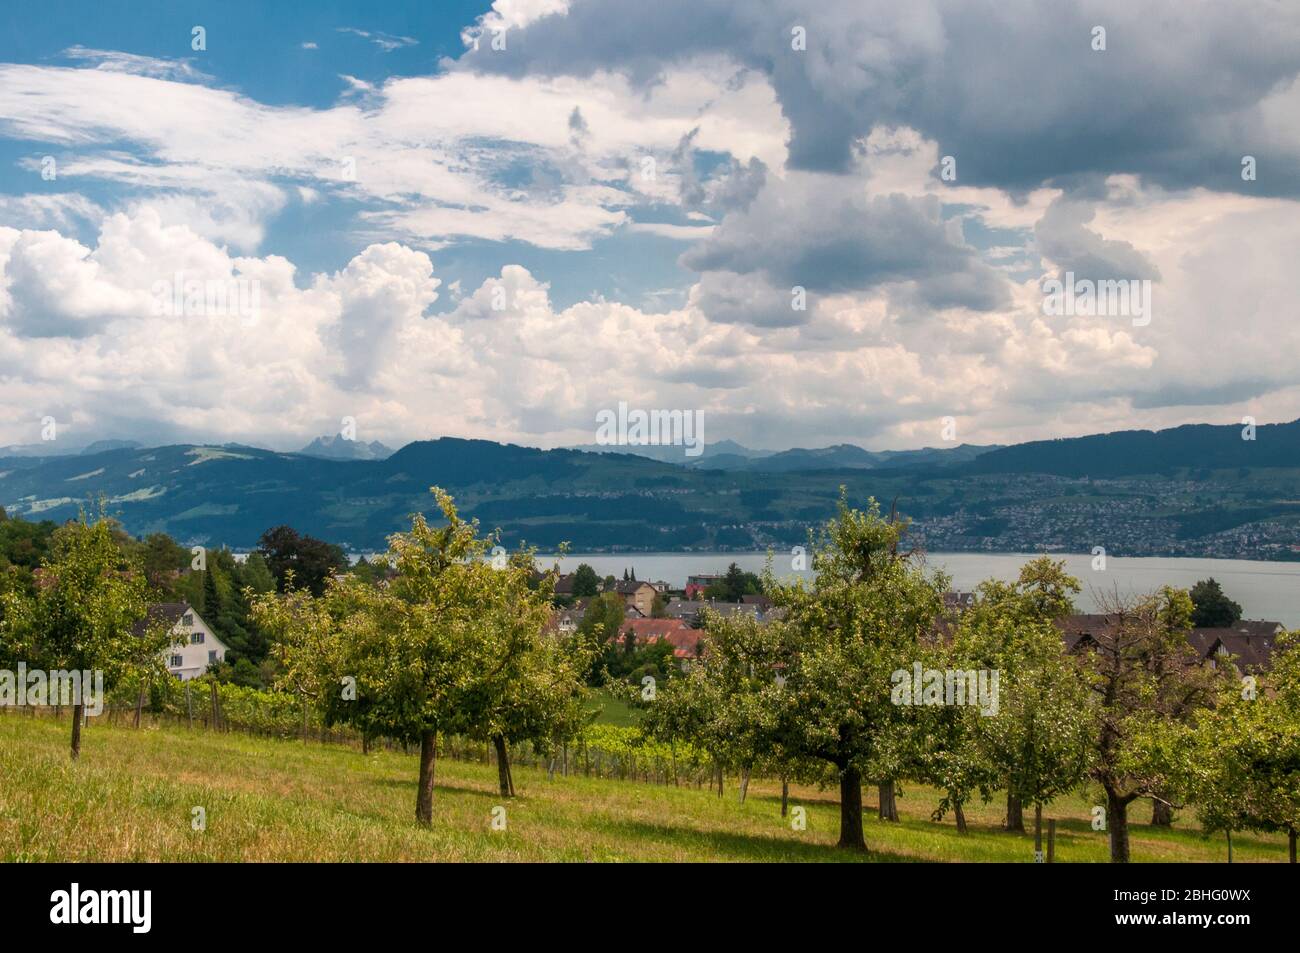 Orchards above the lakeside town of Männedorf on the Zürichsee (Lake Zurich), Switzerland Stock Photo